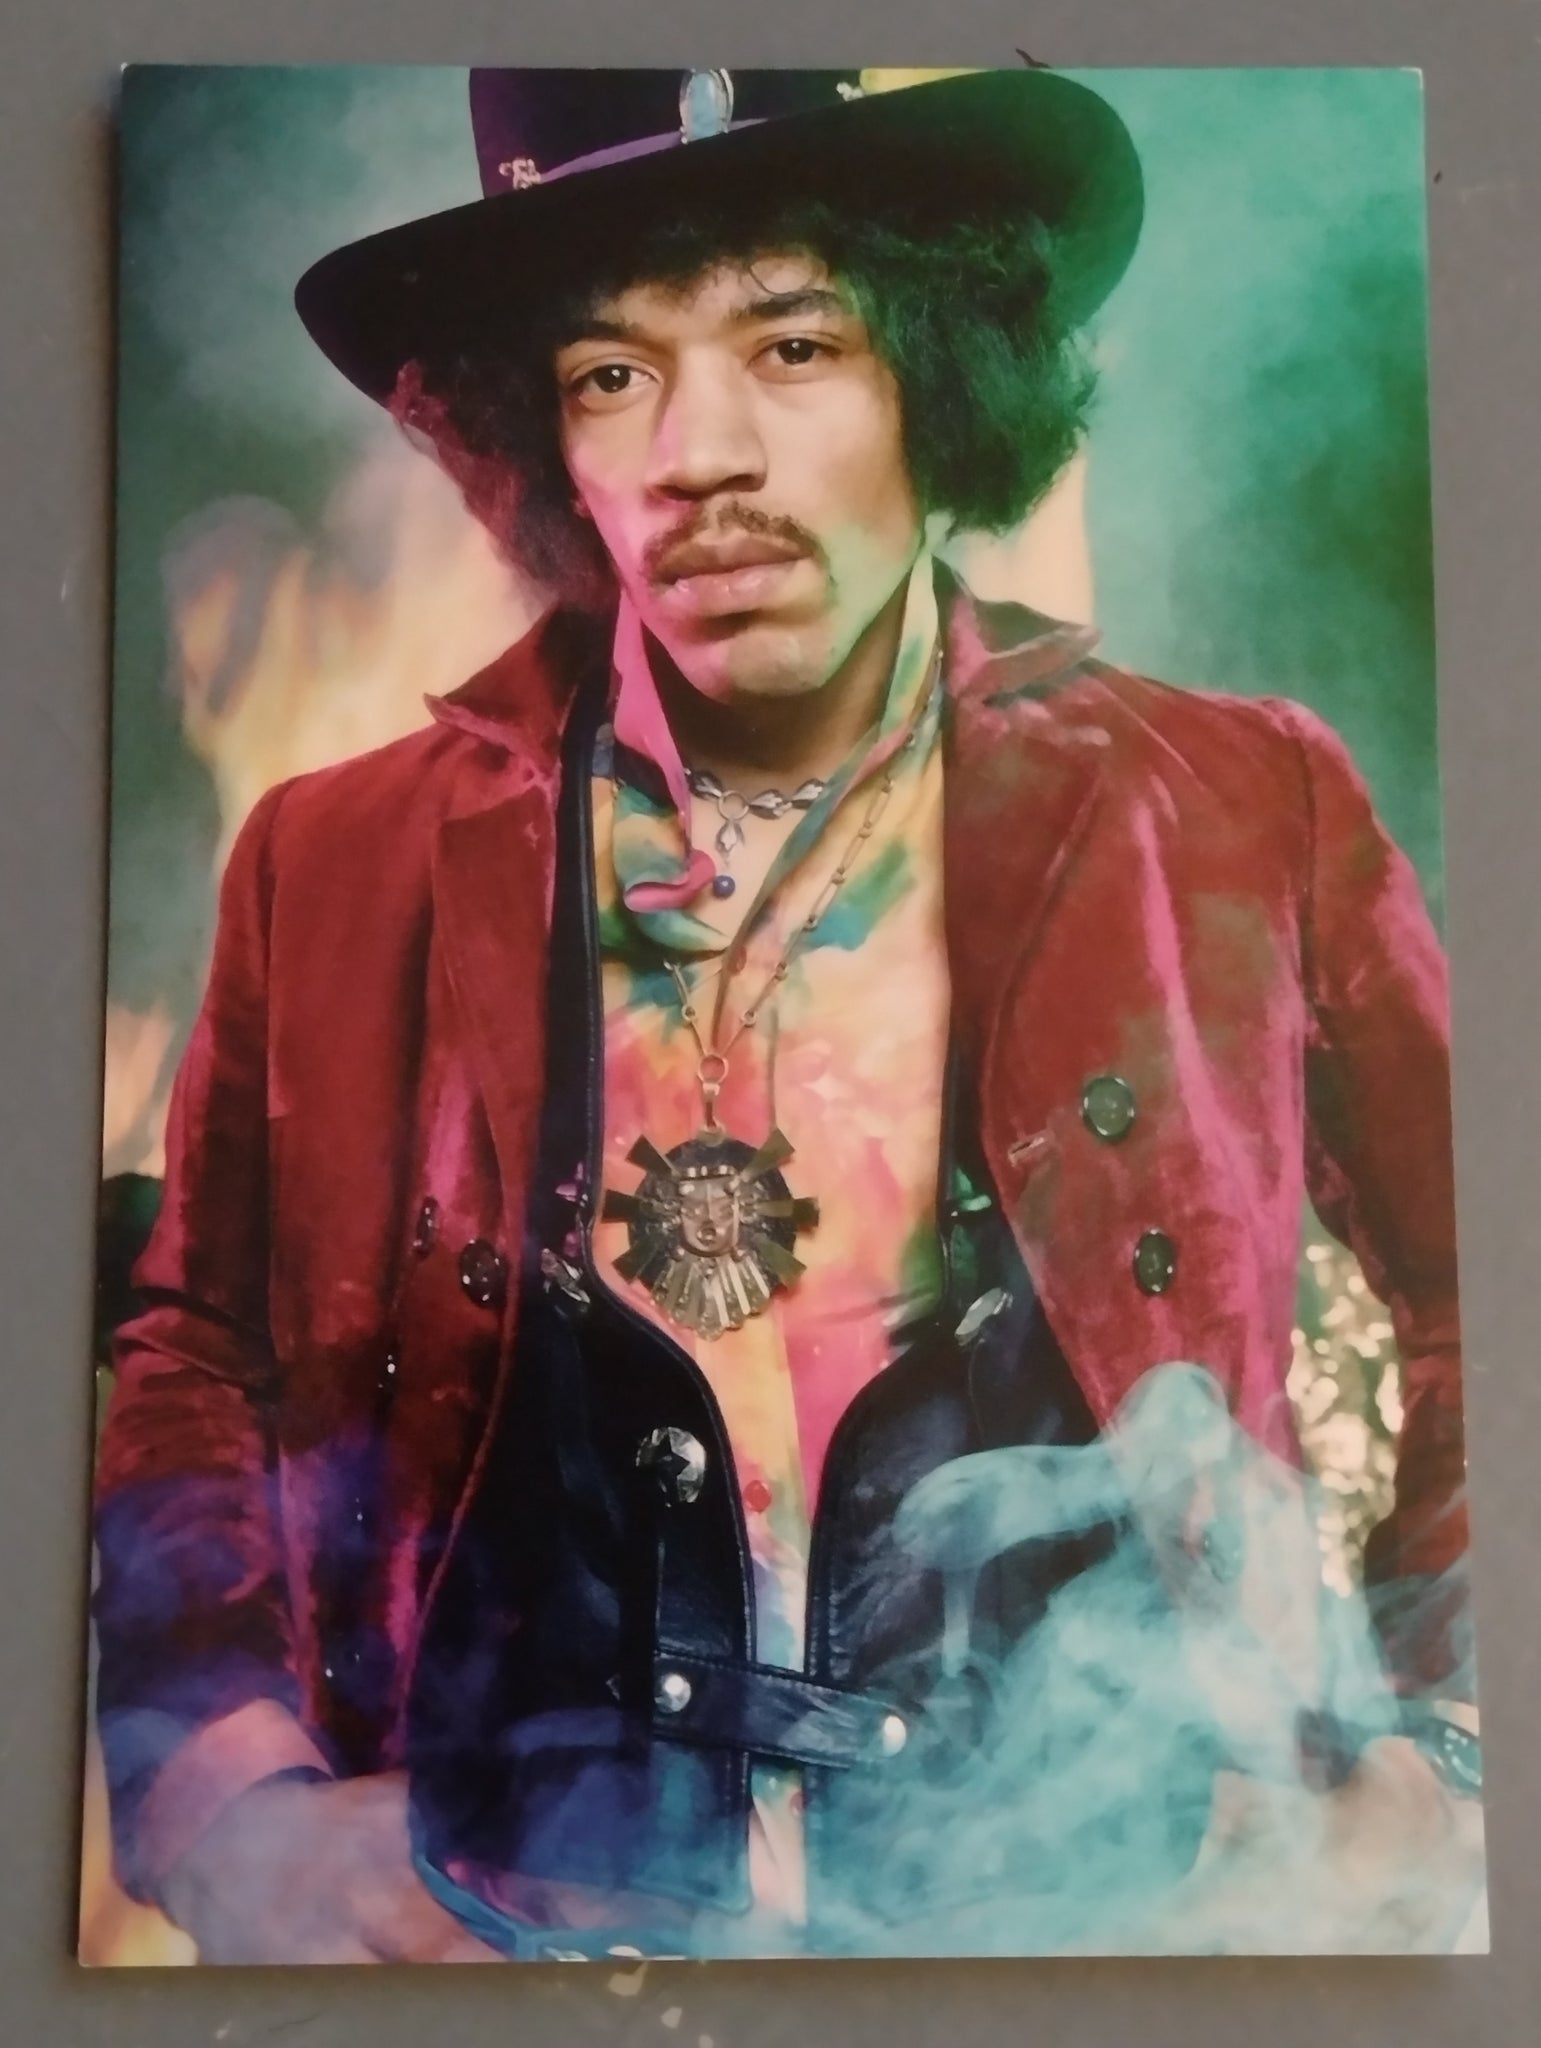 Jimi Hendrix Can You See Me? A Life Through the Lens Promotional Postcard (b)